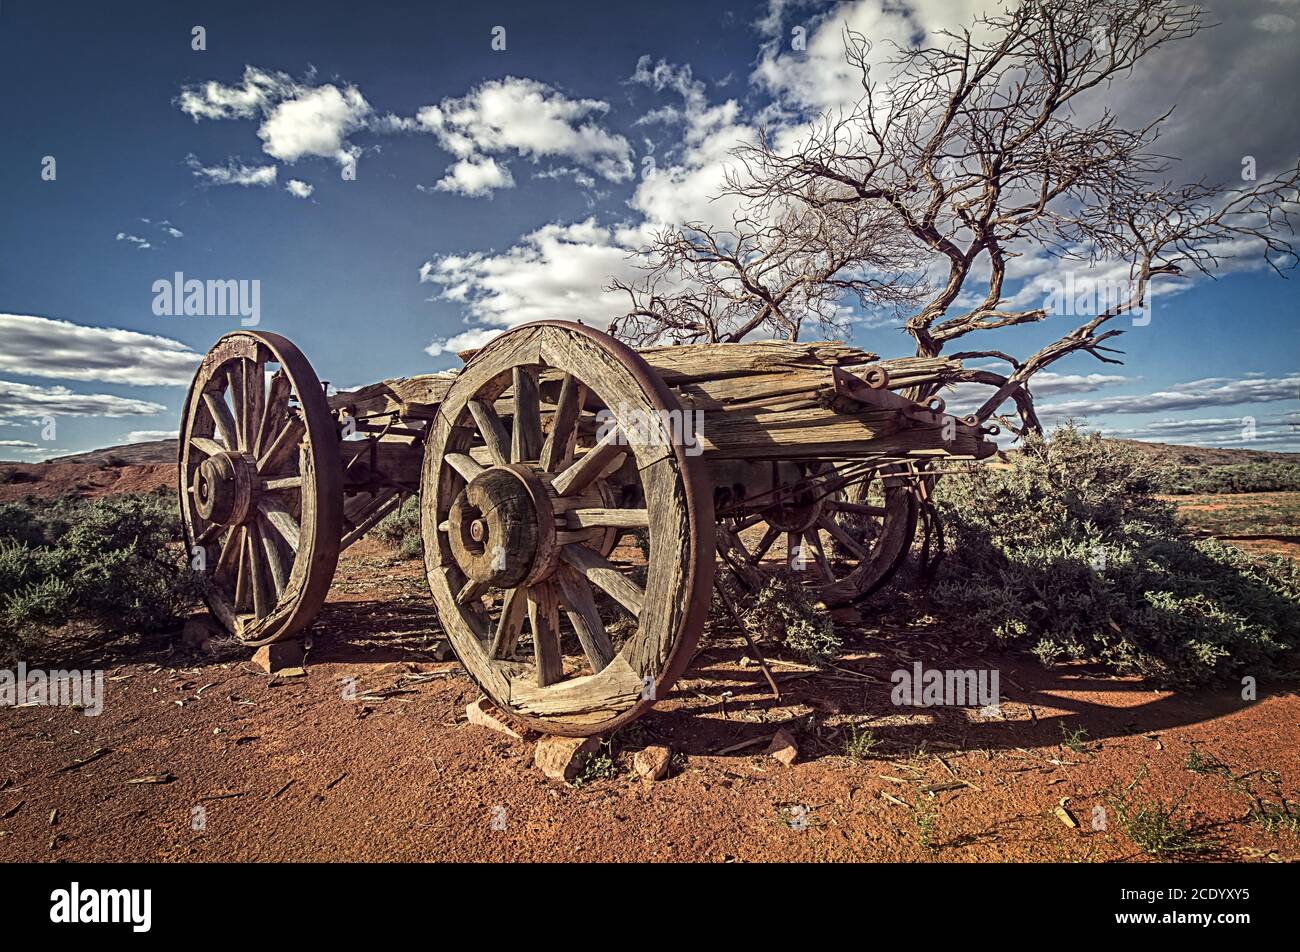 Australia  Outback savanna with an old vintage derelict horse-drawn carriage at the bush under blue sky Stock Photo